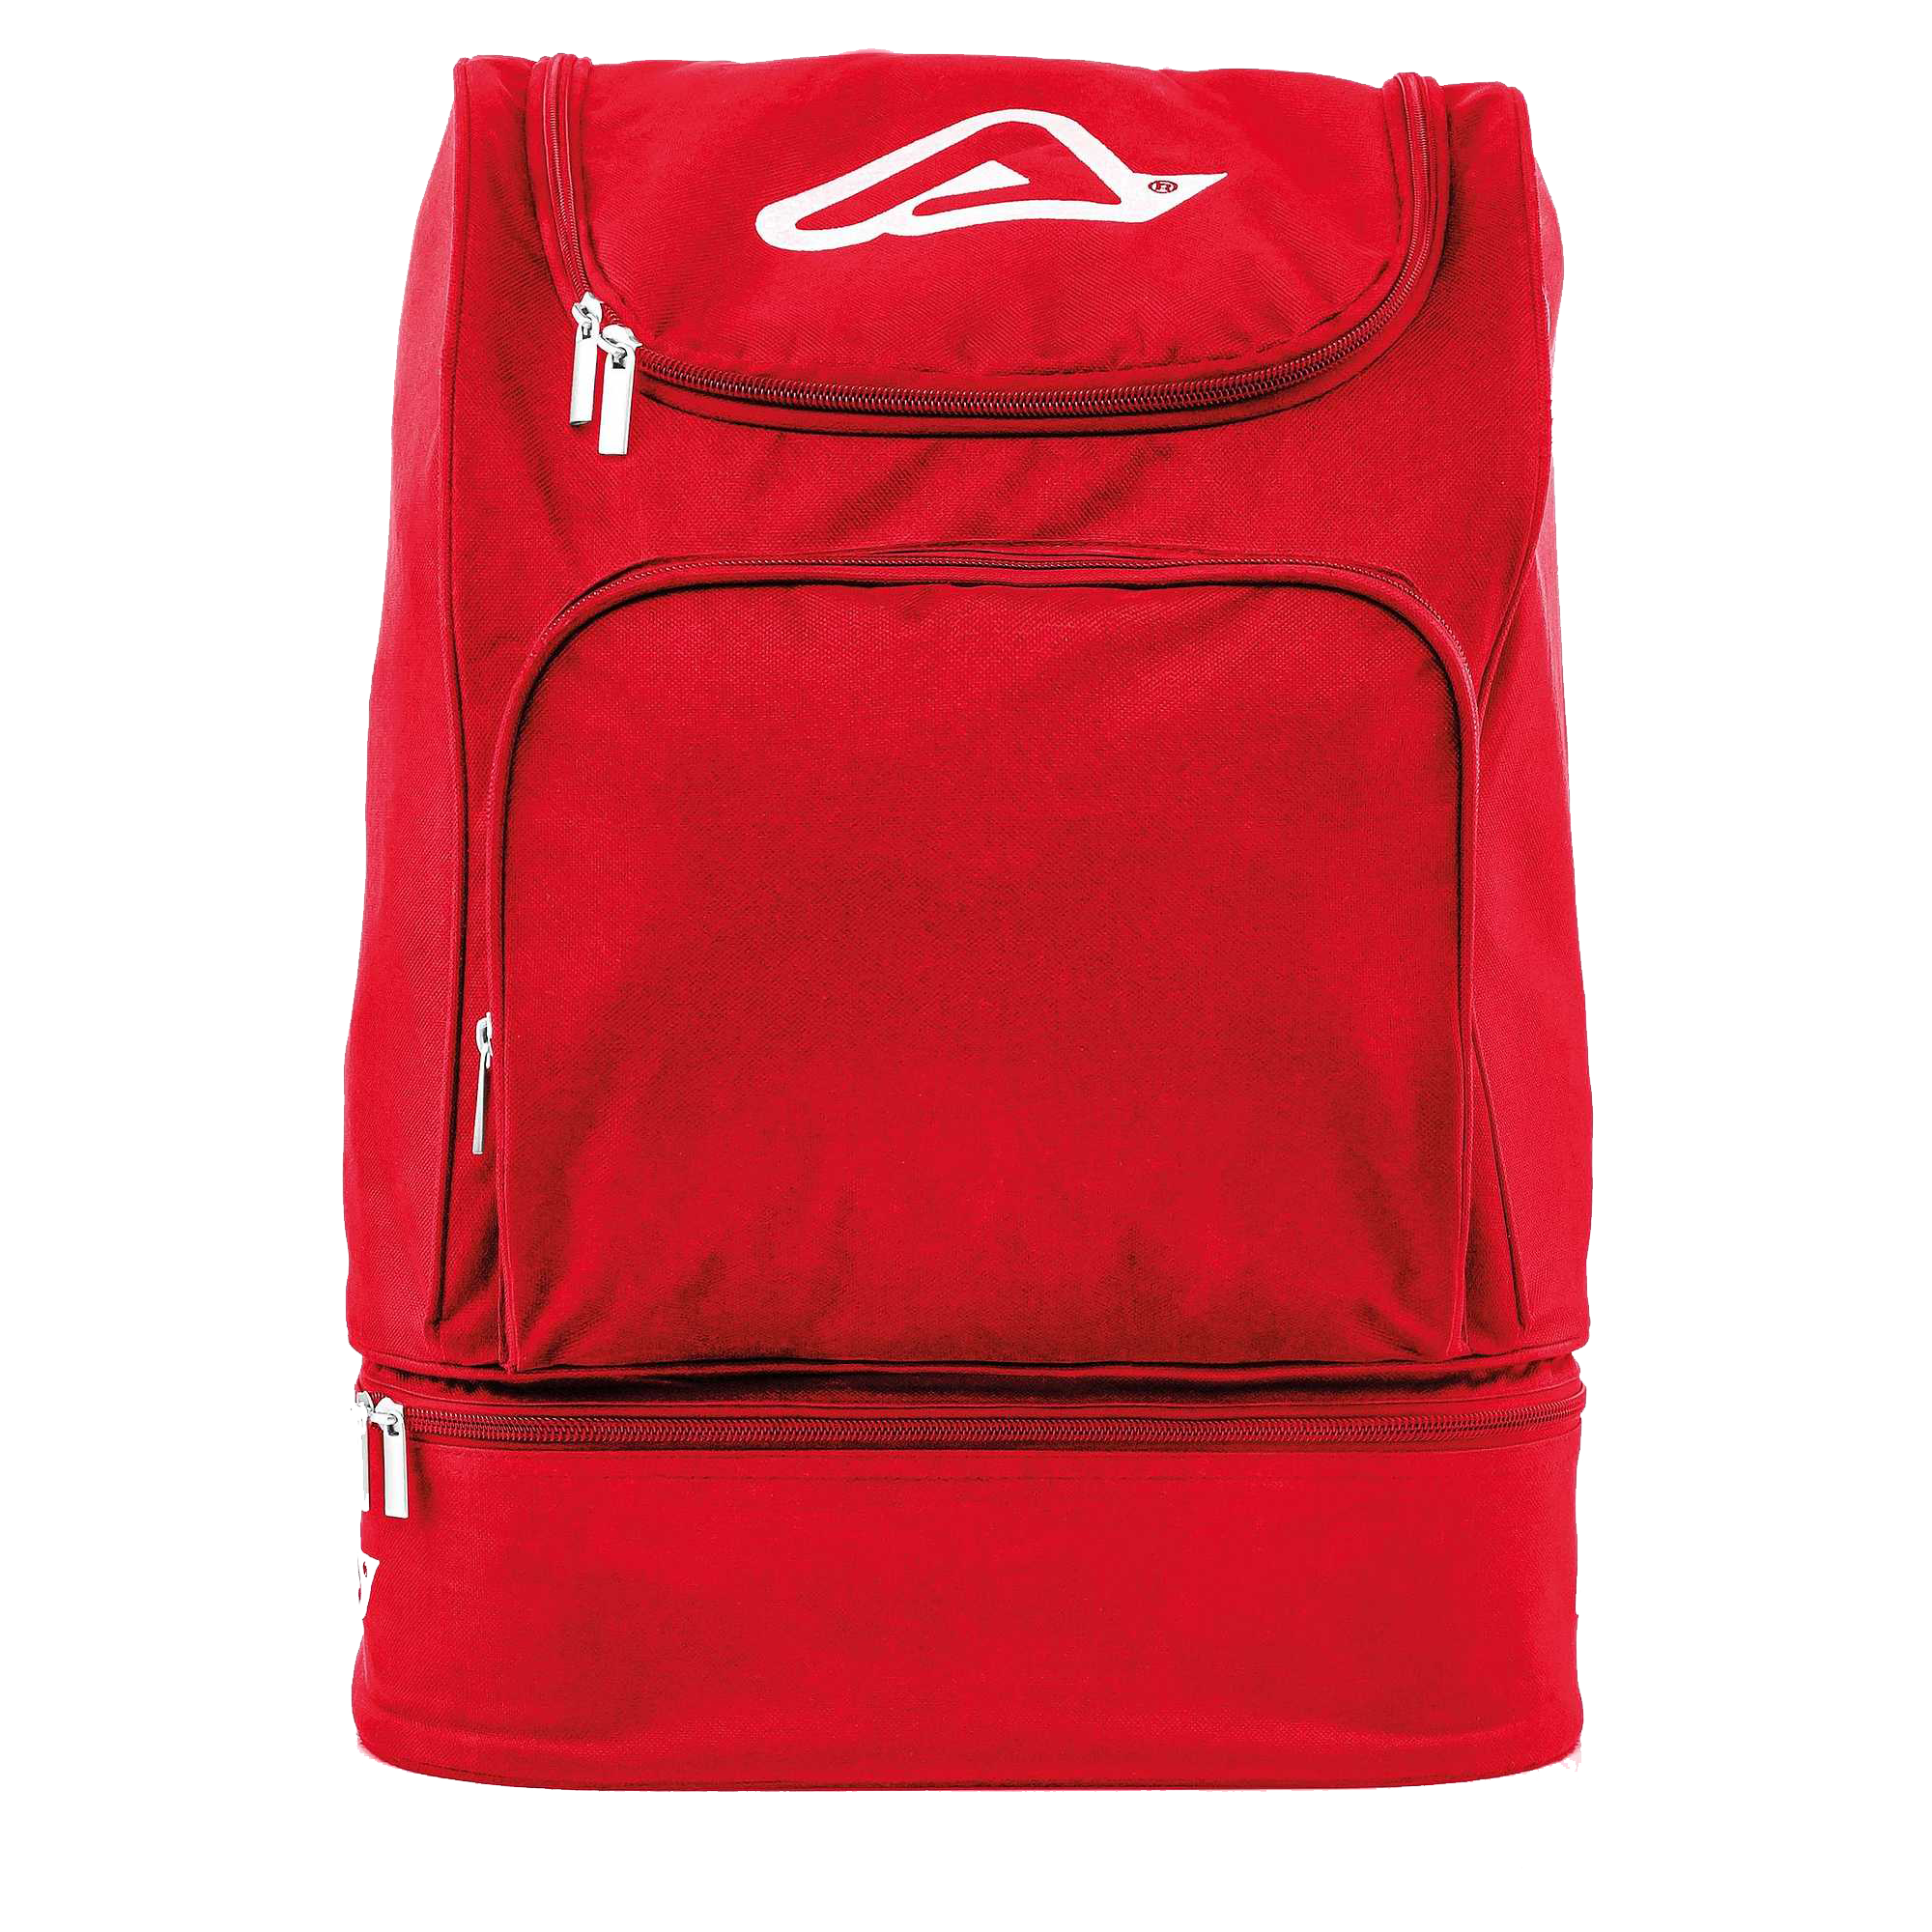 Red Backpack  Transparent Gallery